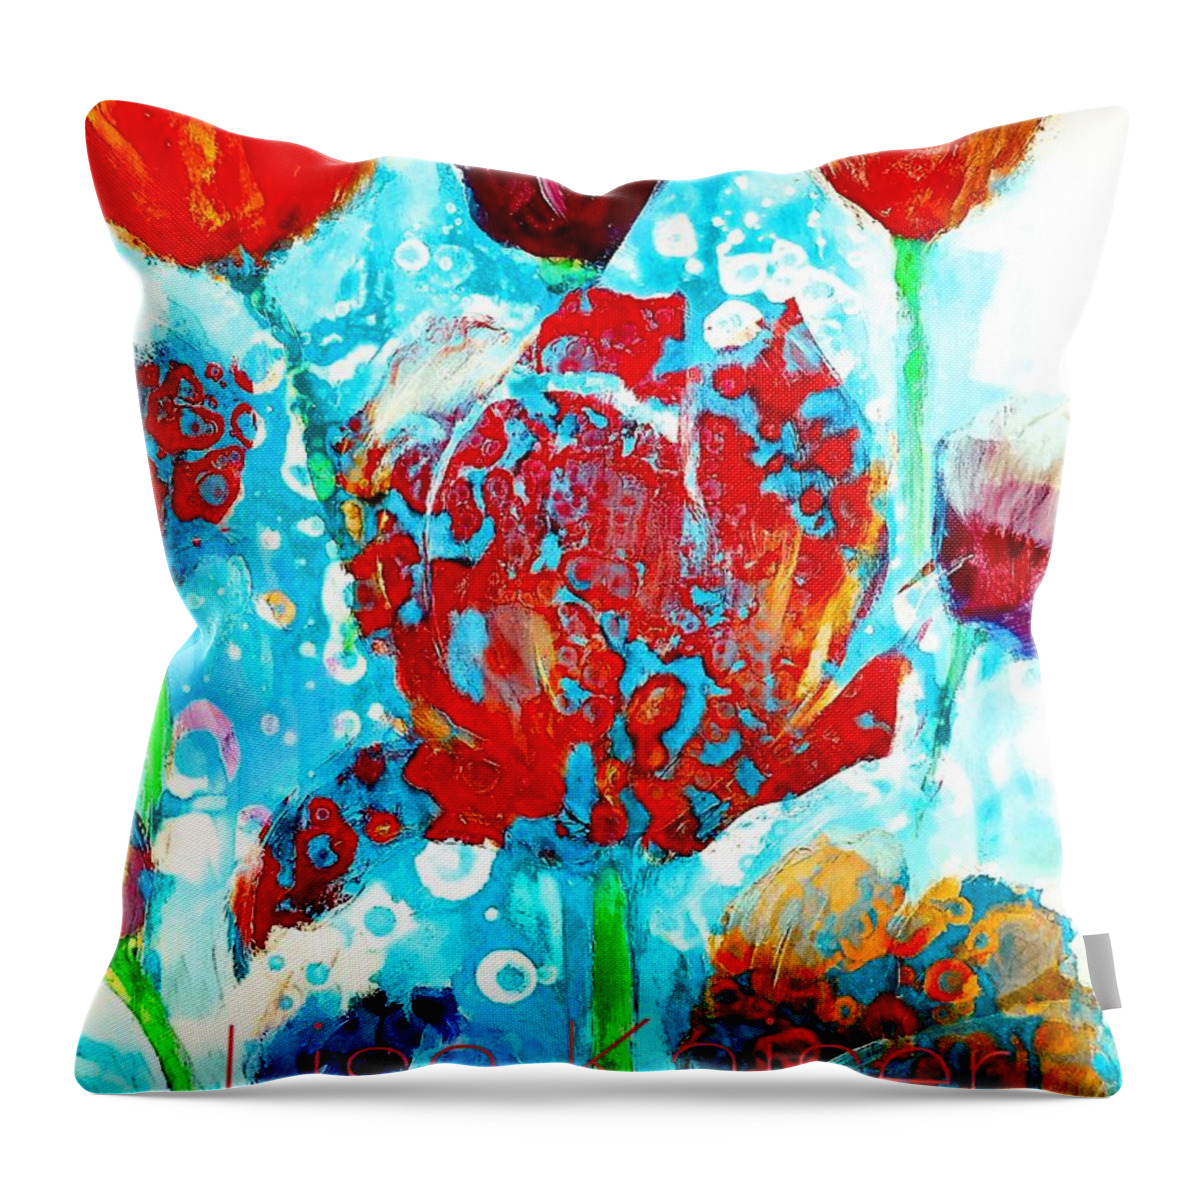 Abstract Throw Pillow featuring the digital art Abstract Floral Flavors by Lisa Kaiser